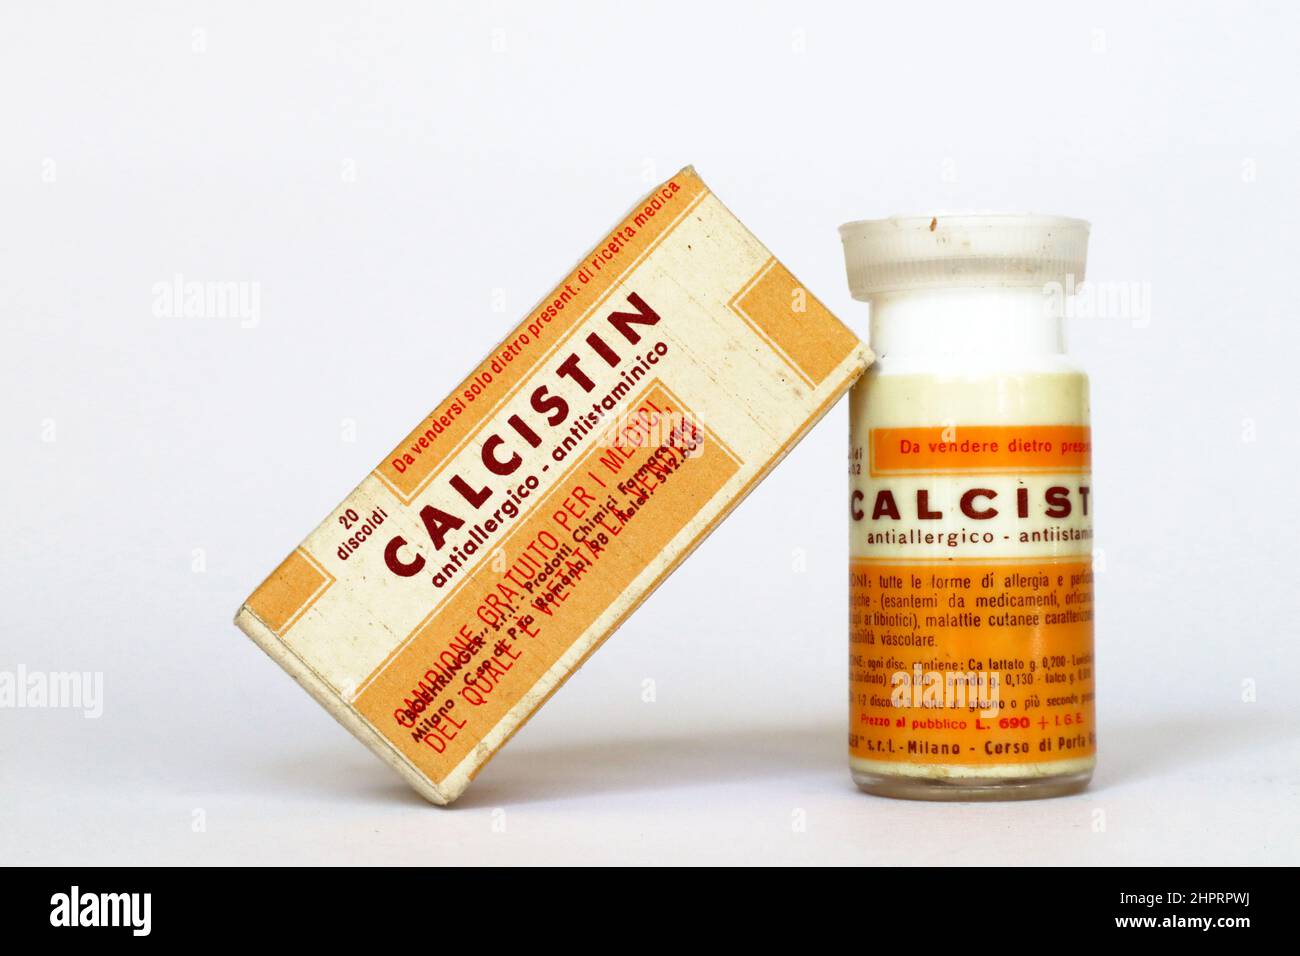 Vintage 1950s CALCISTIN tablets medicine with Calcium Lactate for the treatment of allergies. BOEHRINGER s.r.l. - Milan (Italy) Stock Photo